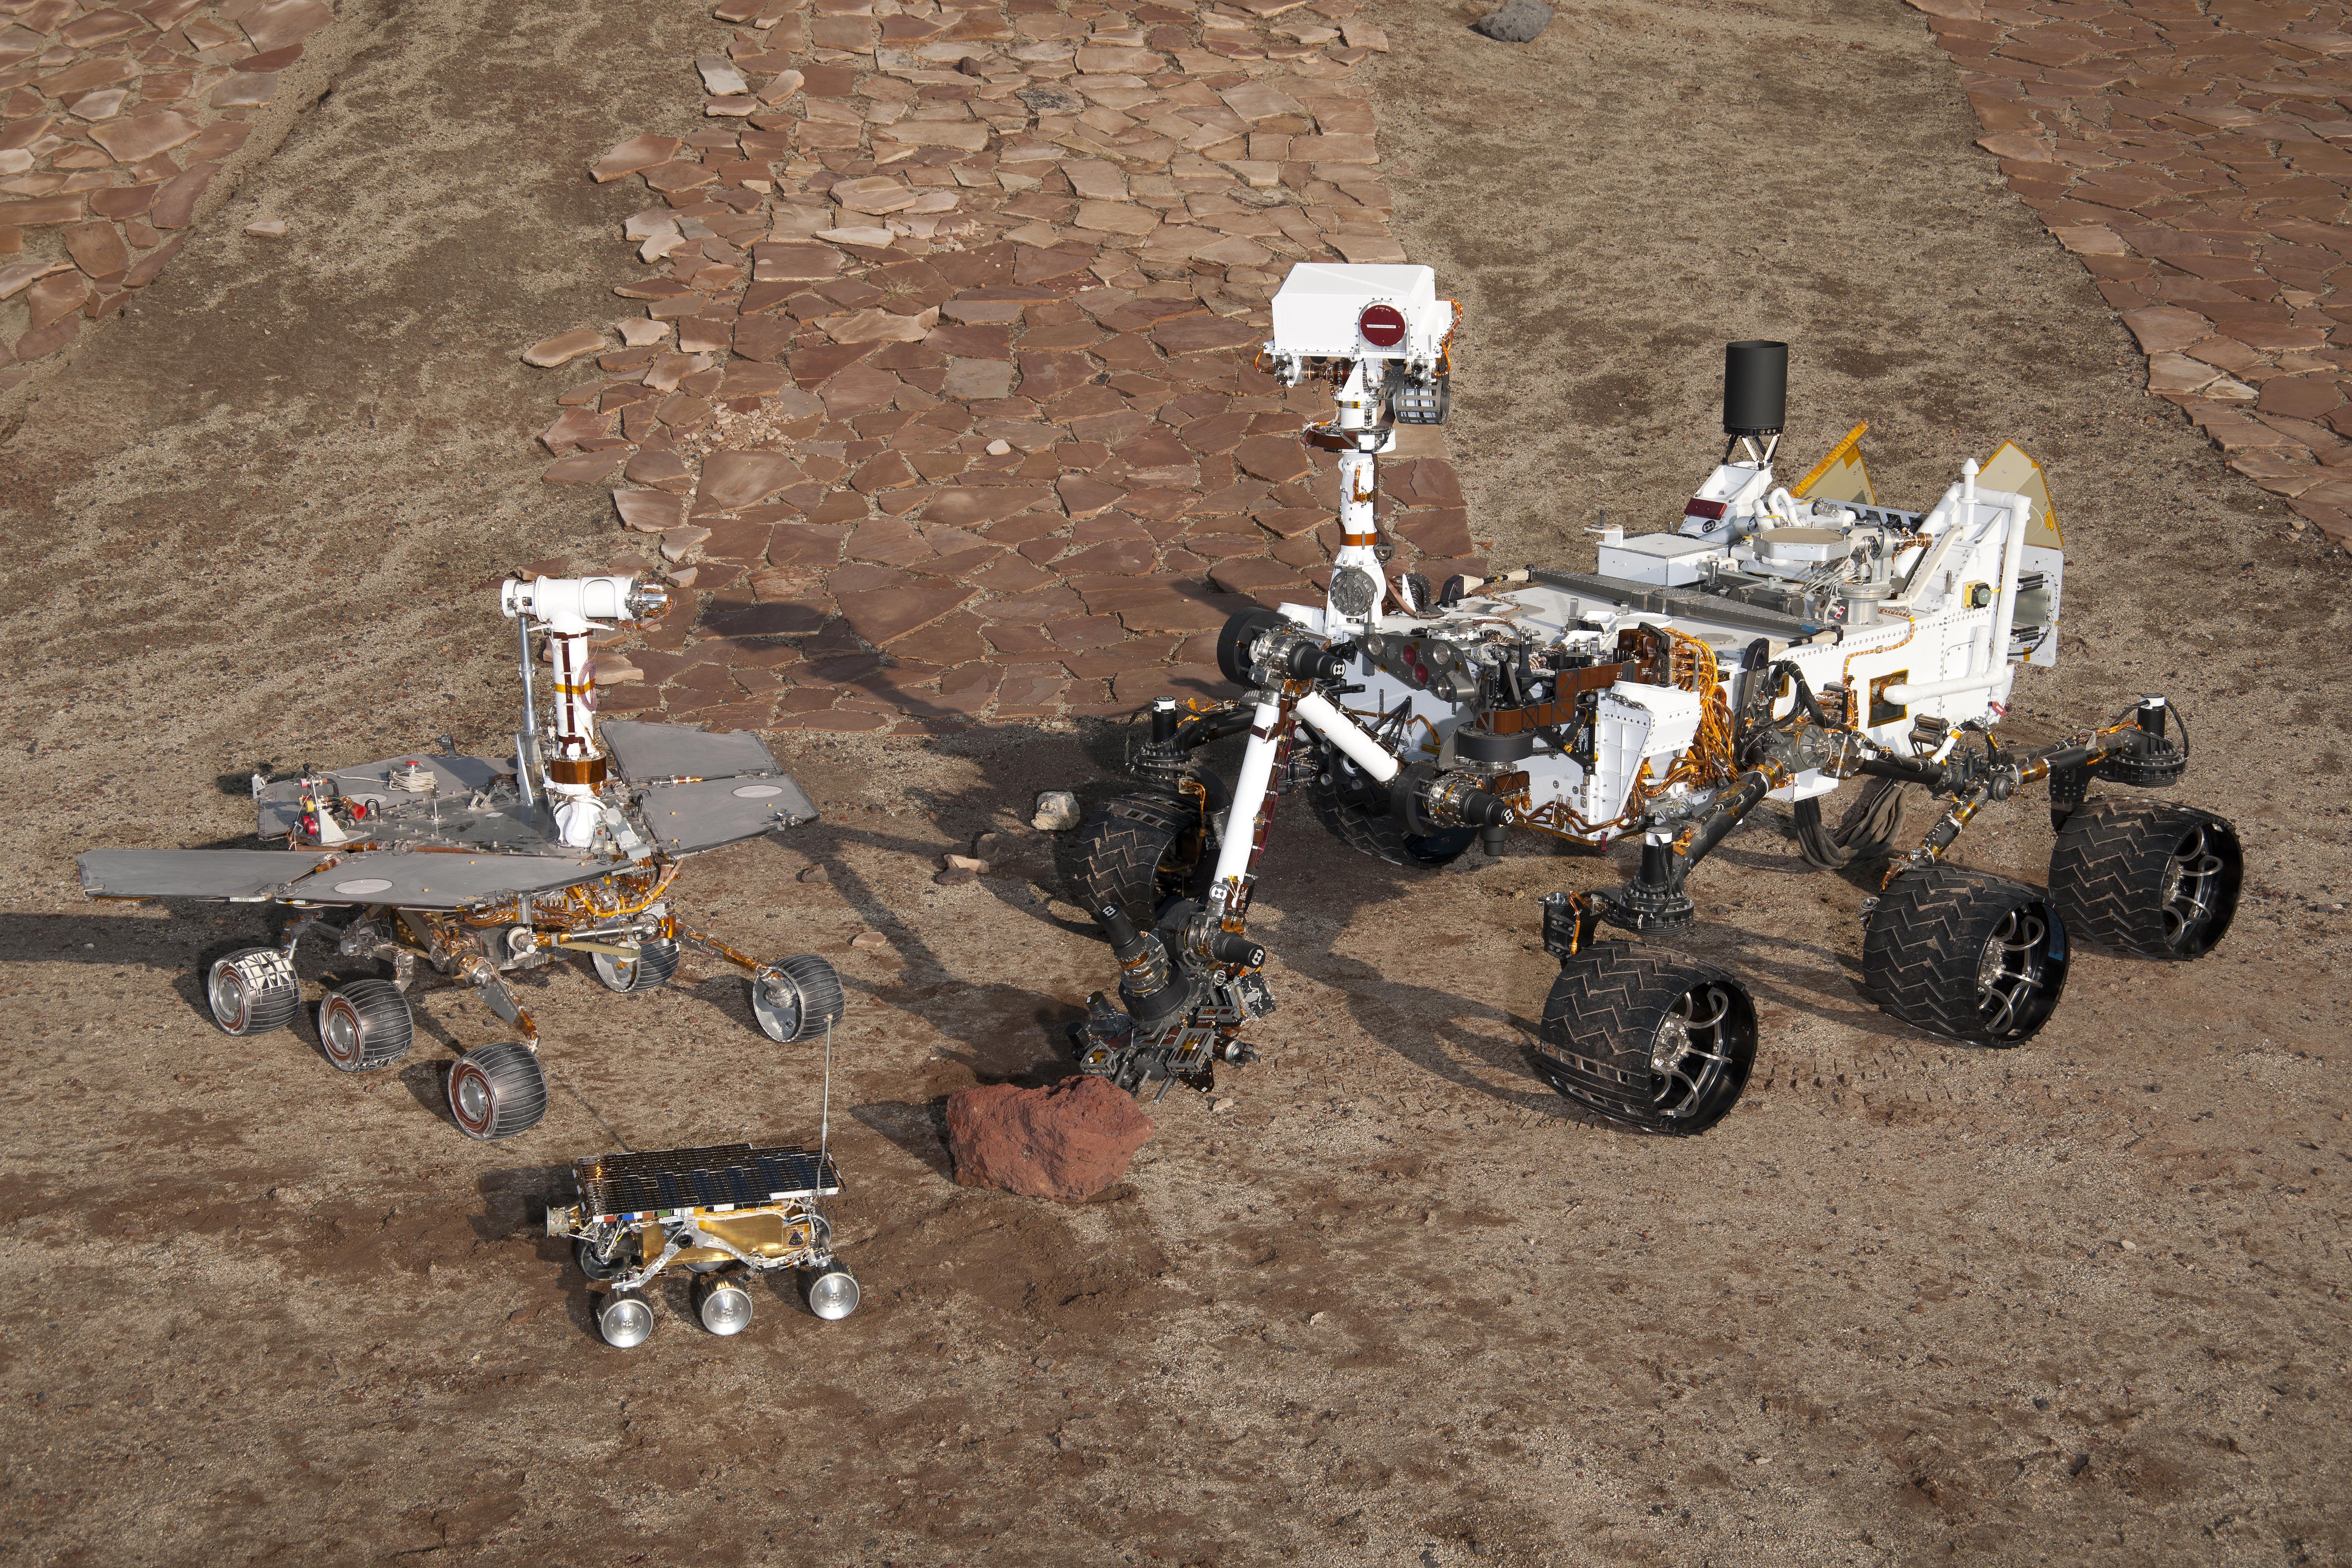 NASA's Curiosity rover can now pick which bits of Mars to scan